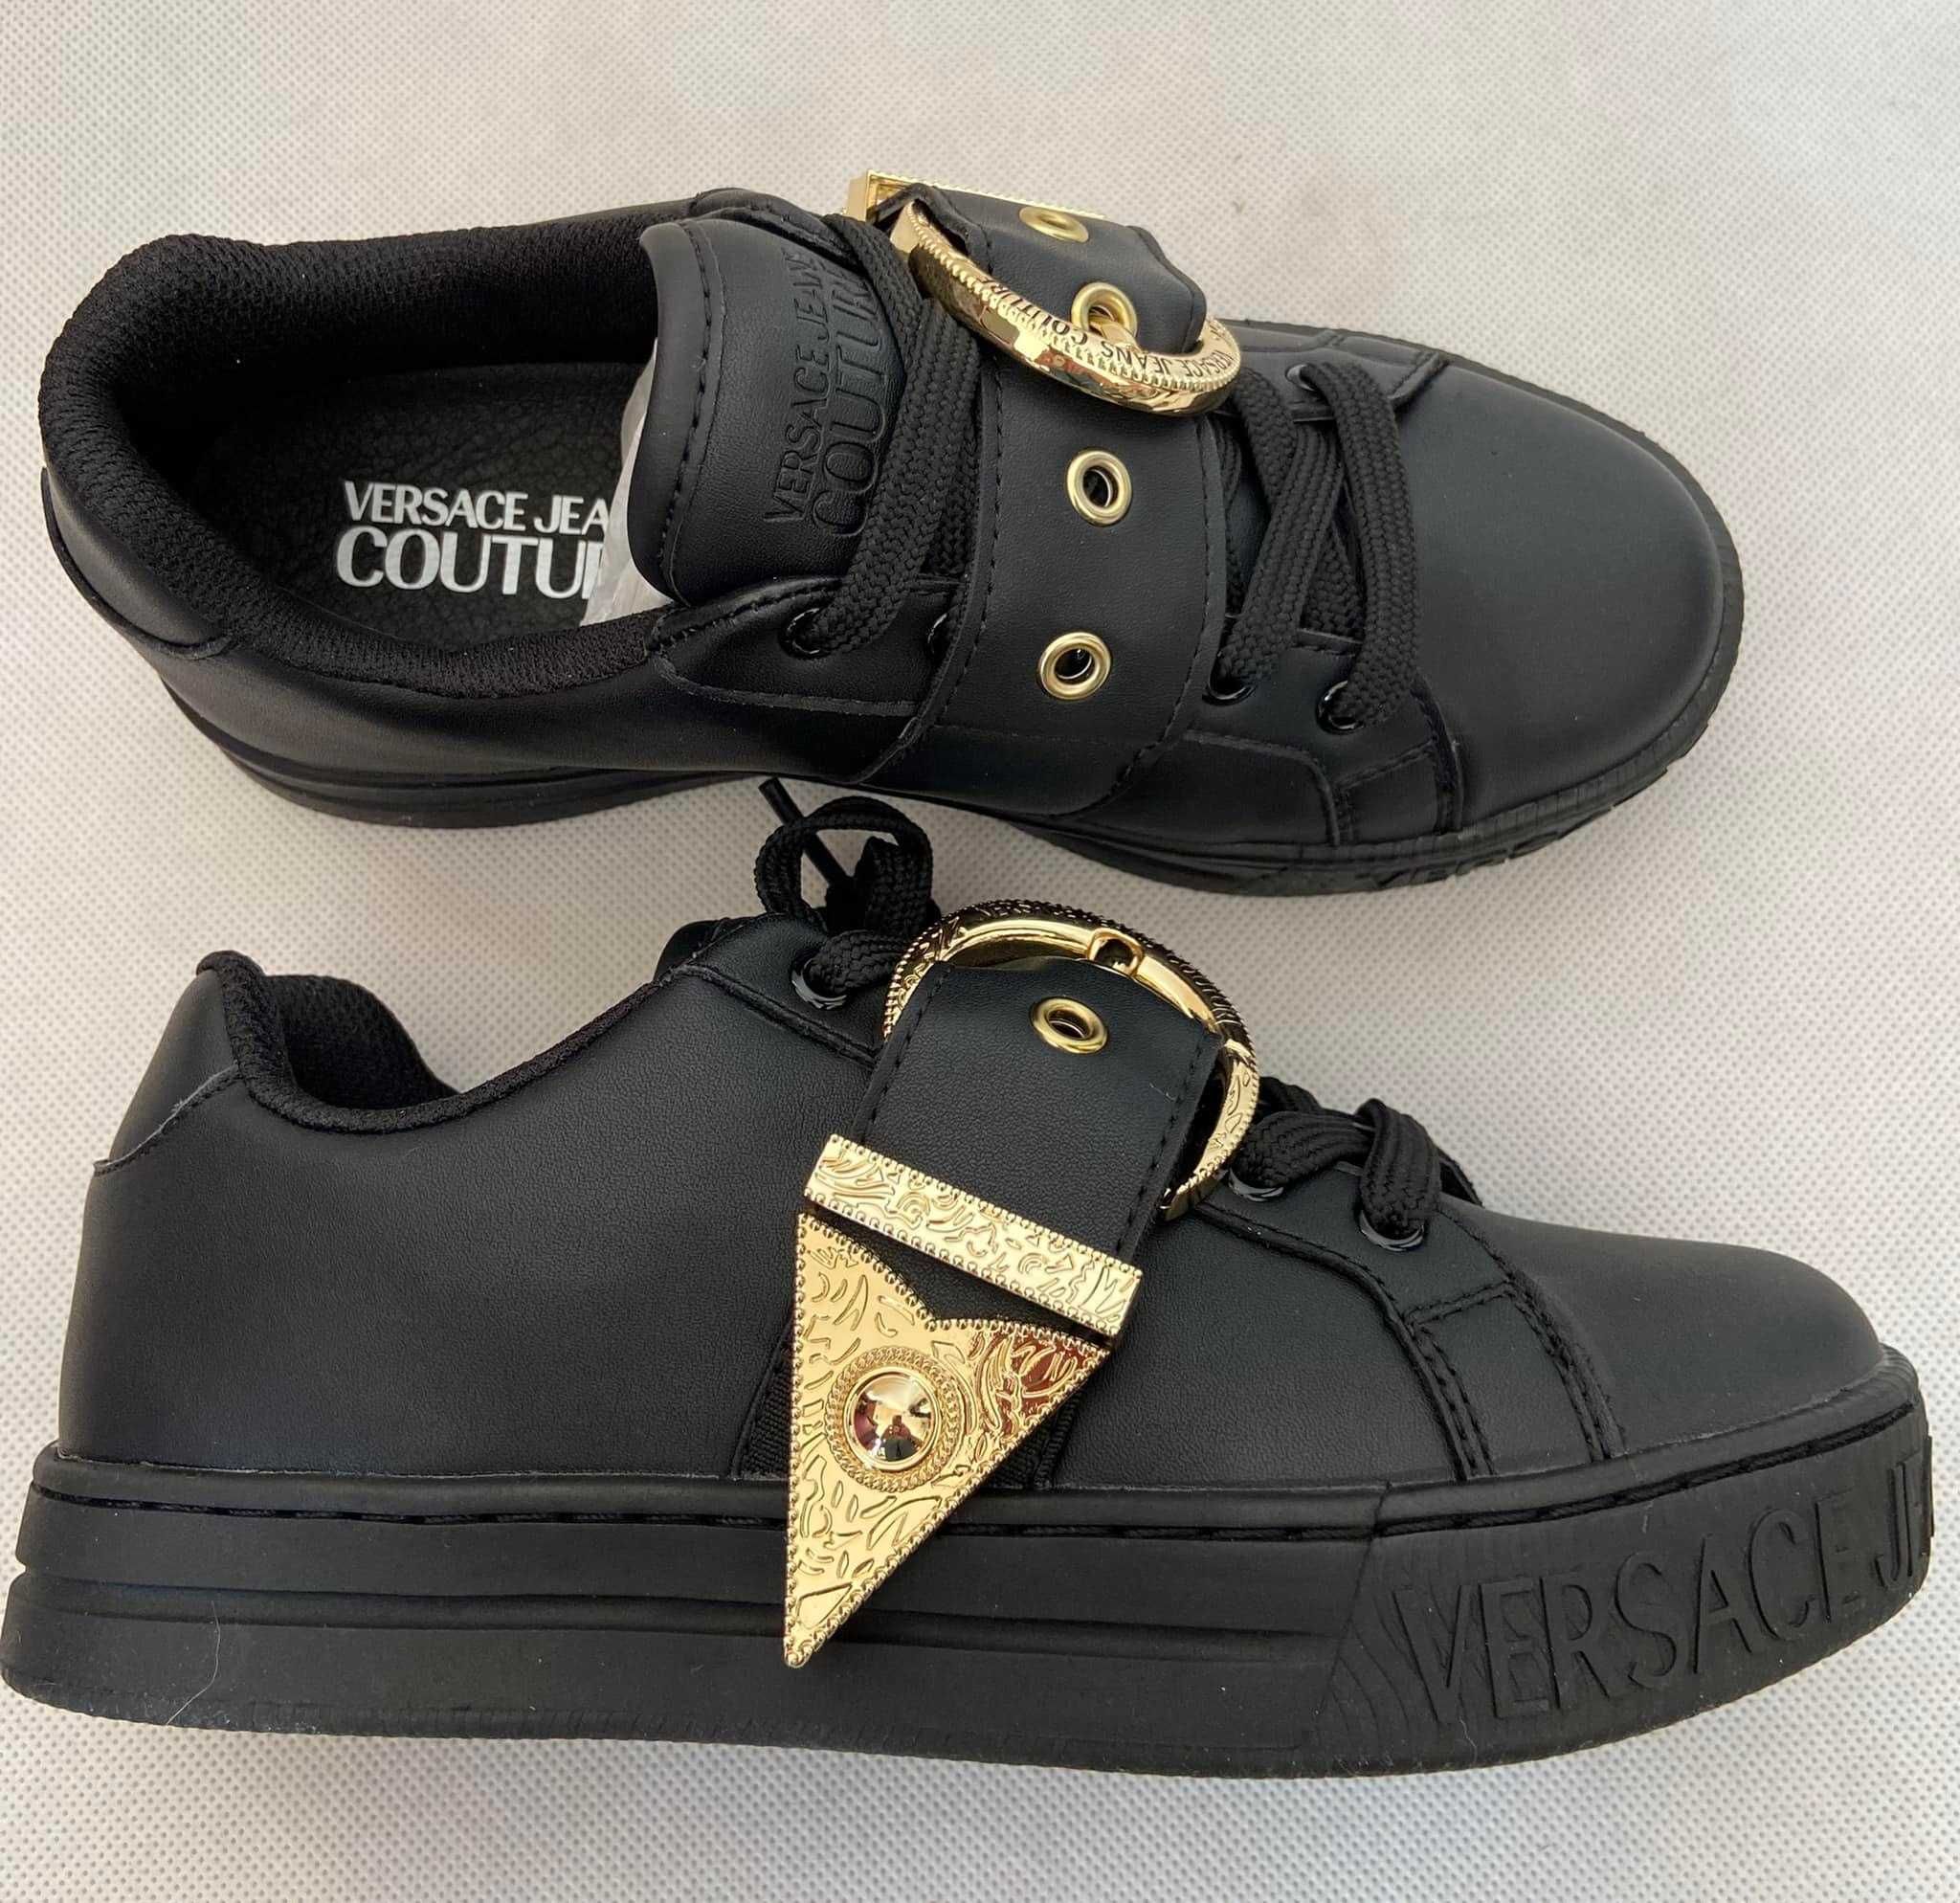 Versace Jeans Couture nowe buty roz.35